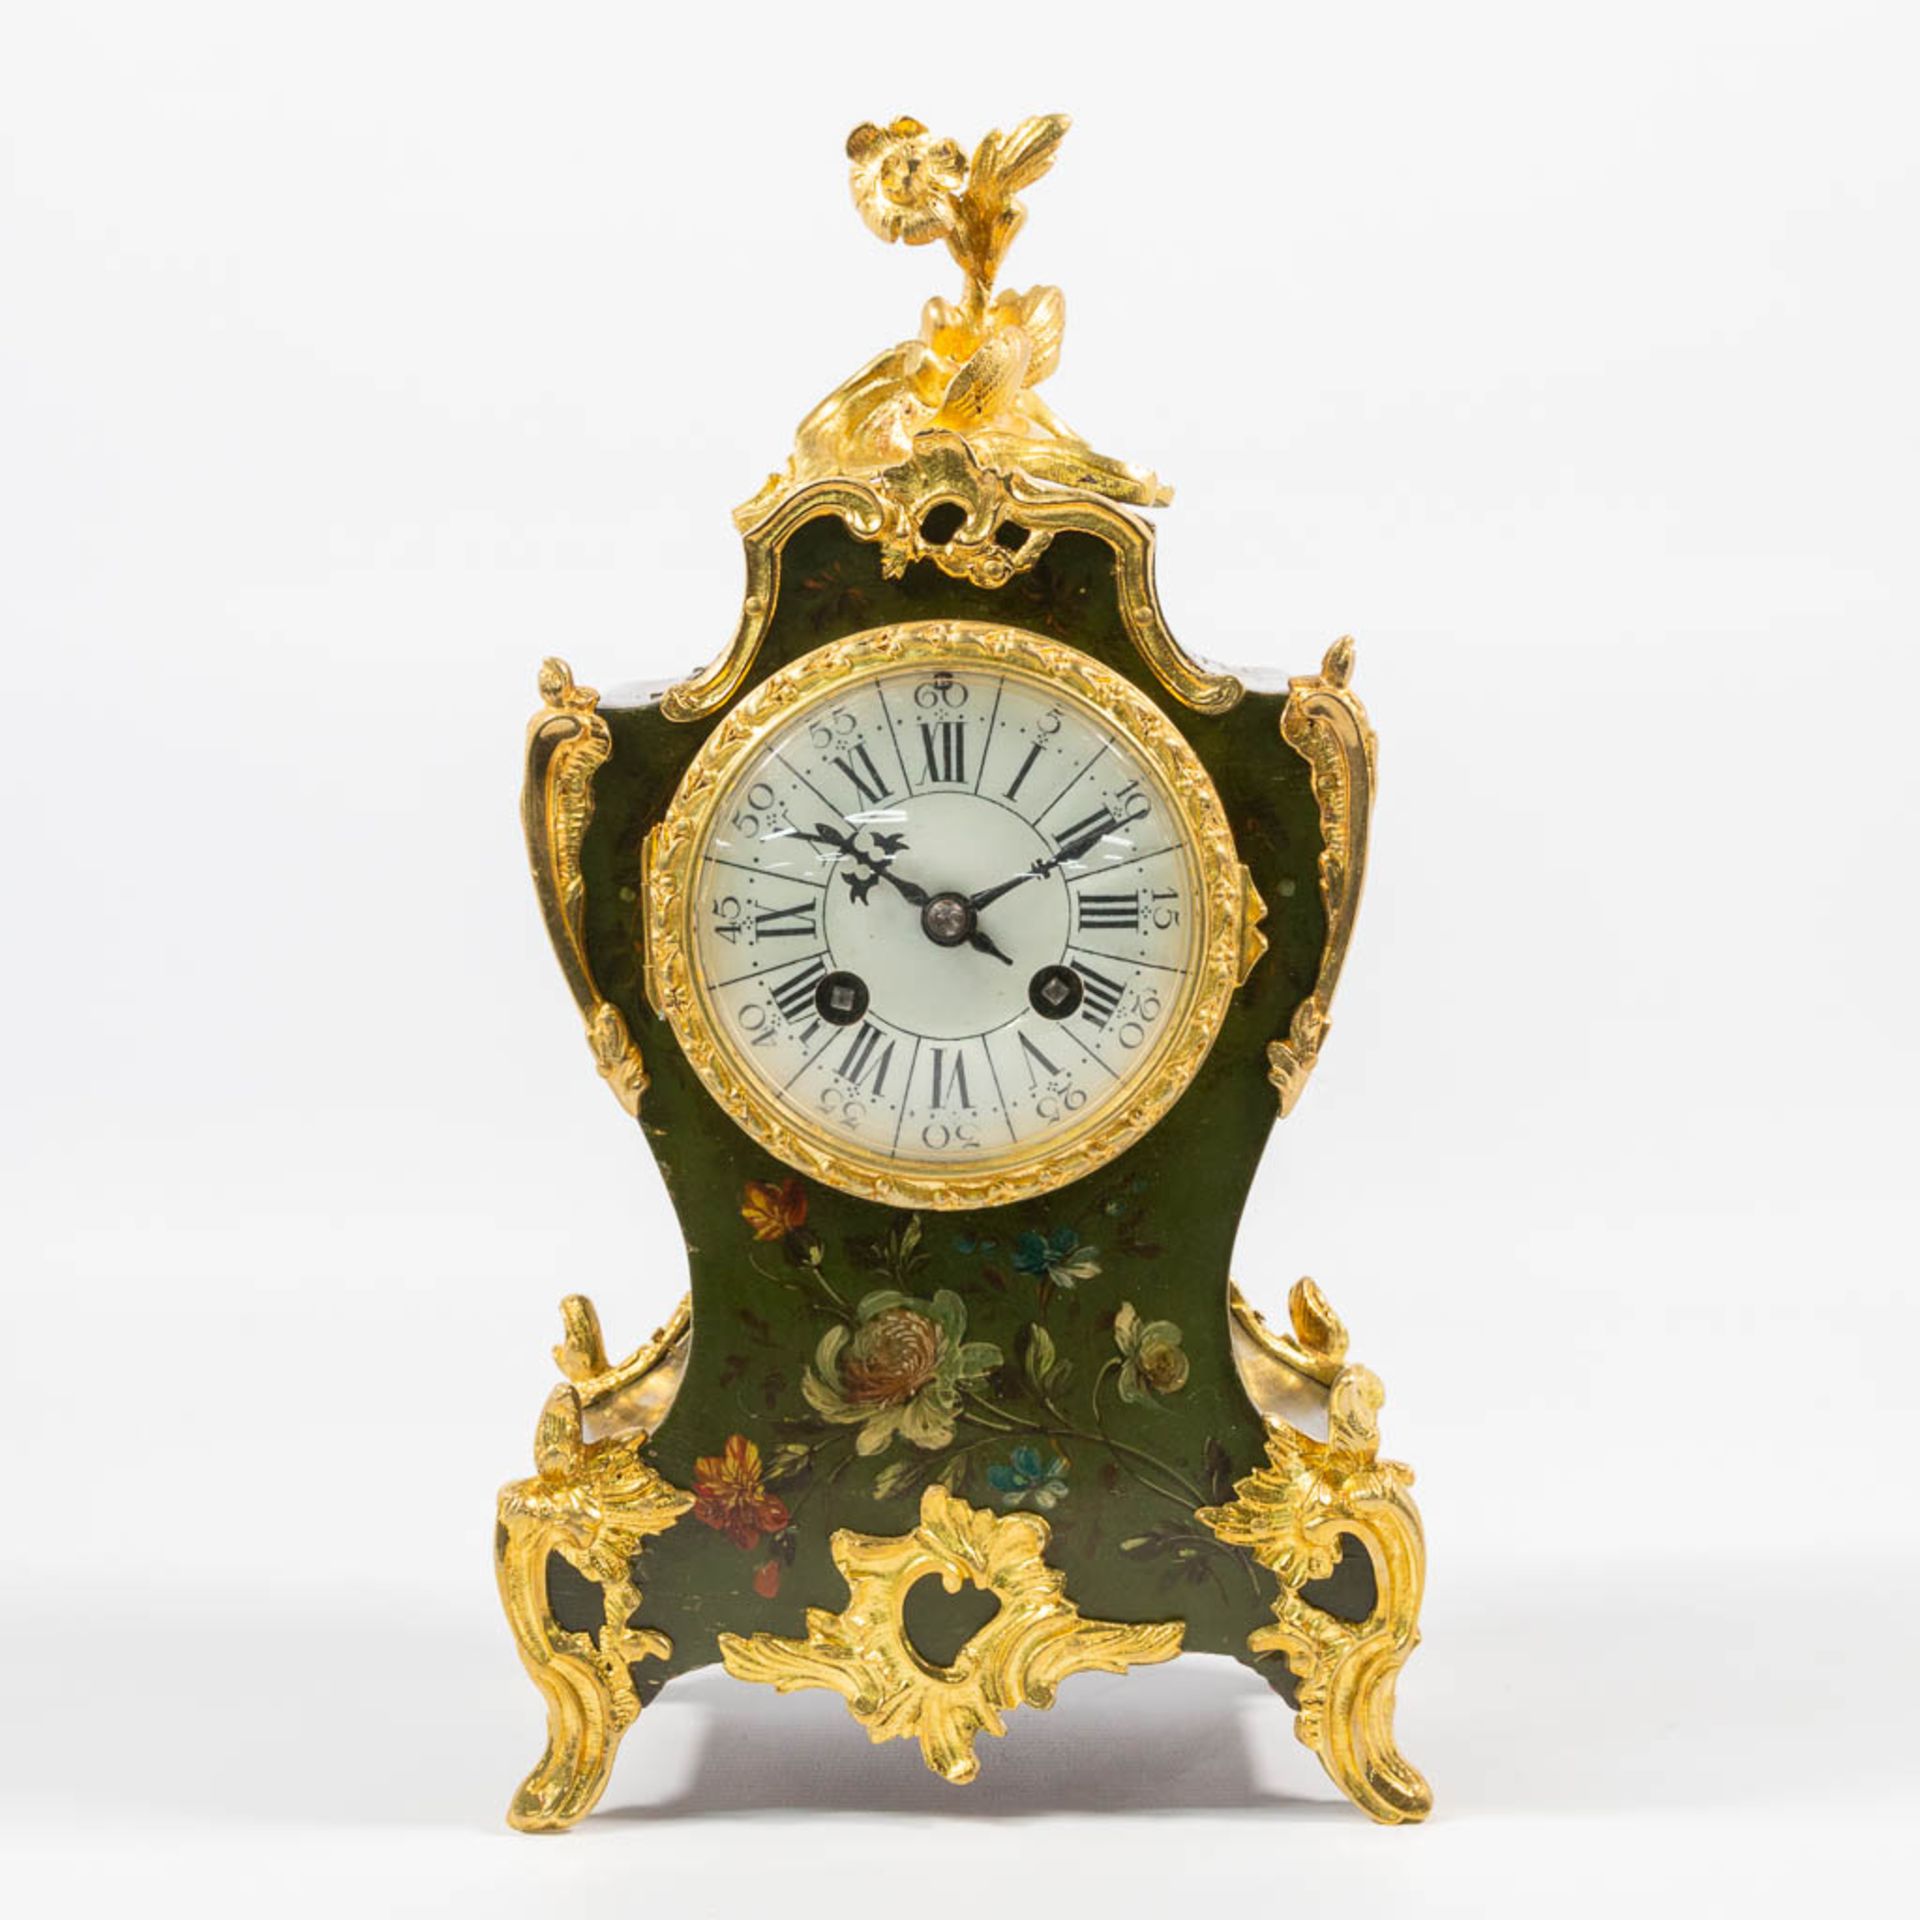 A table clock made of wood, decorated with hand-painted decor